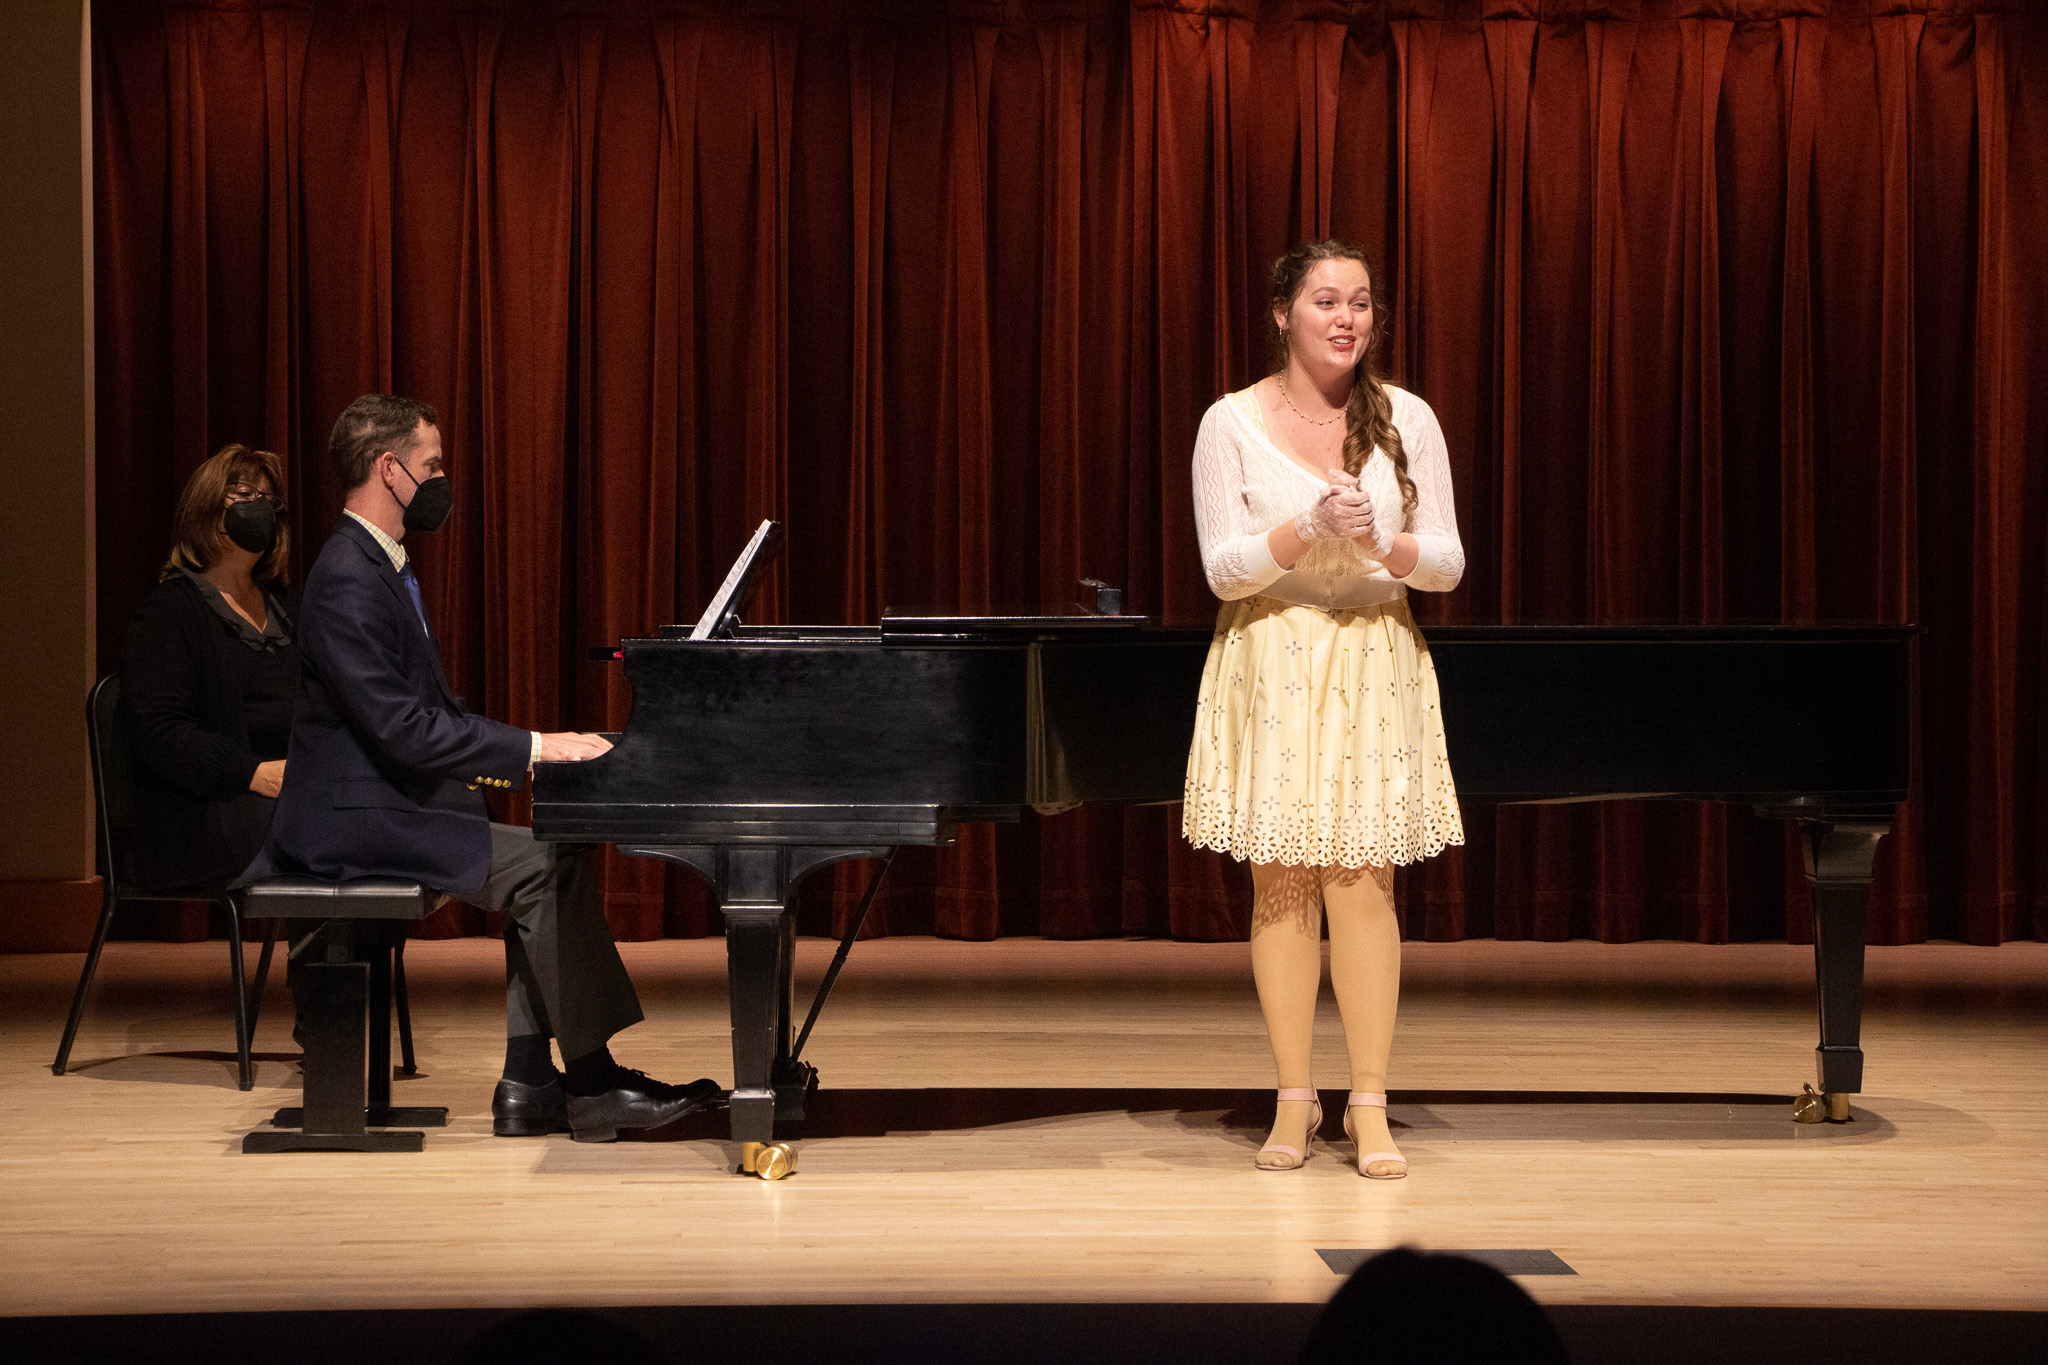 Singer in a yellow outfit on stage with a piano accompanist